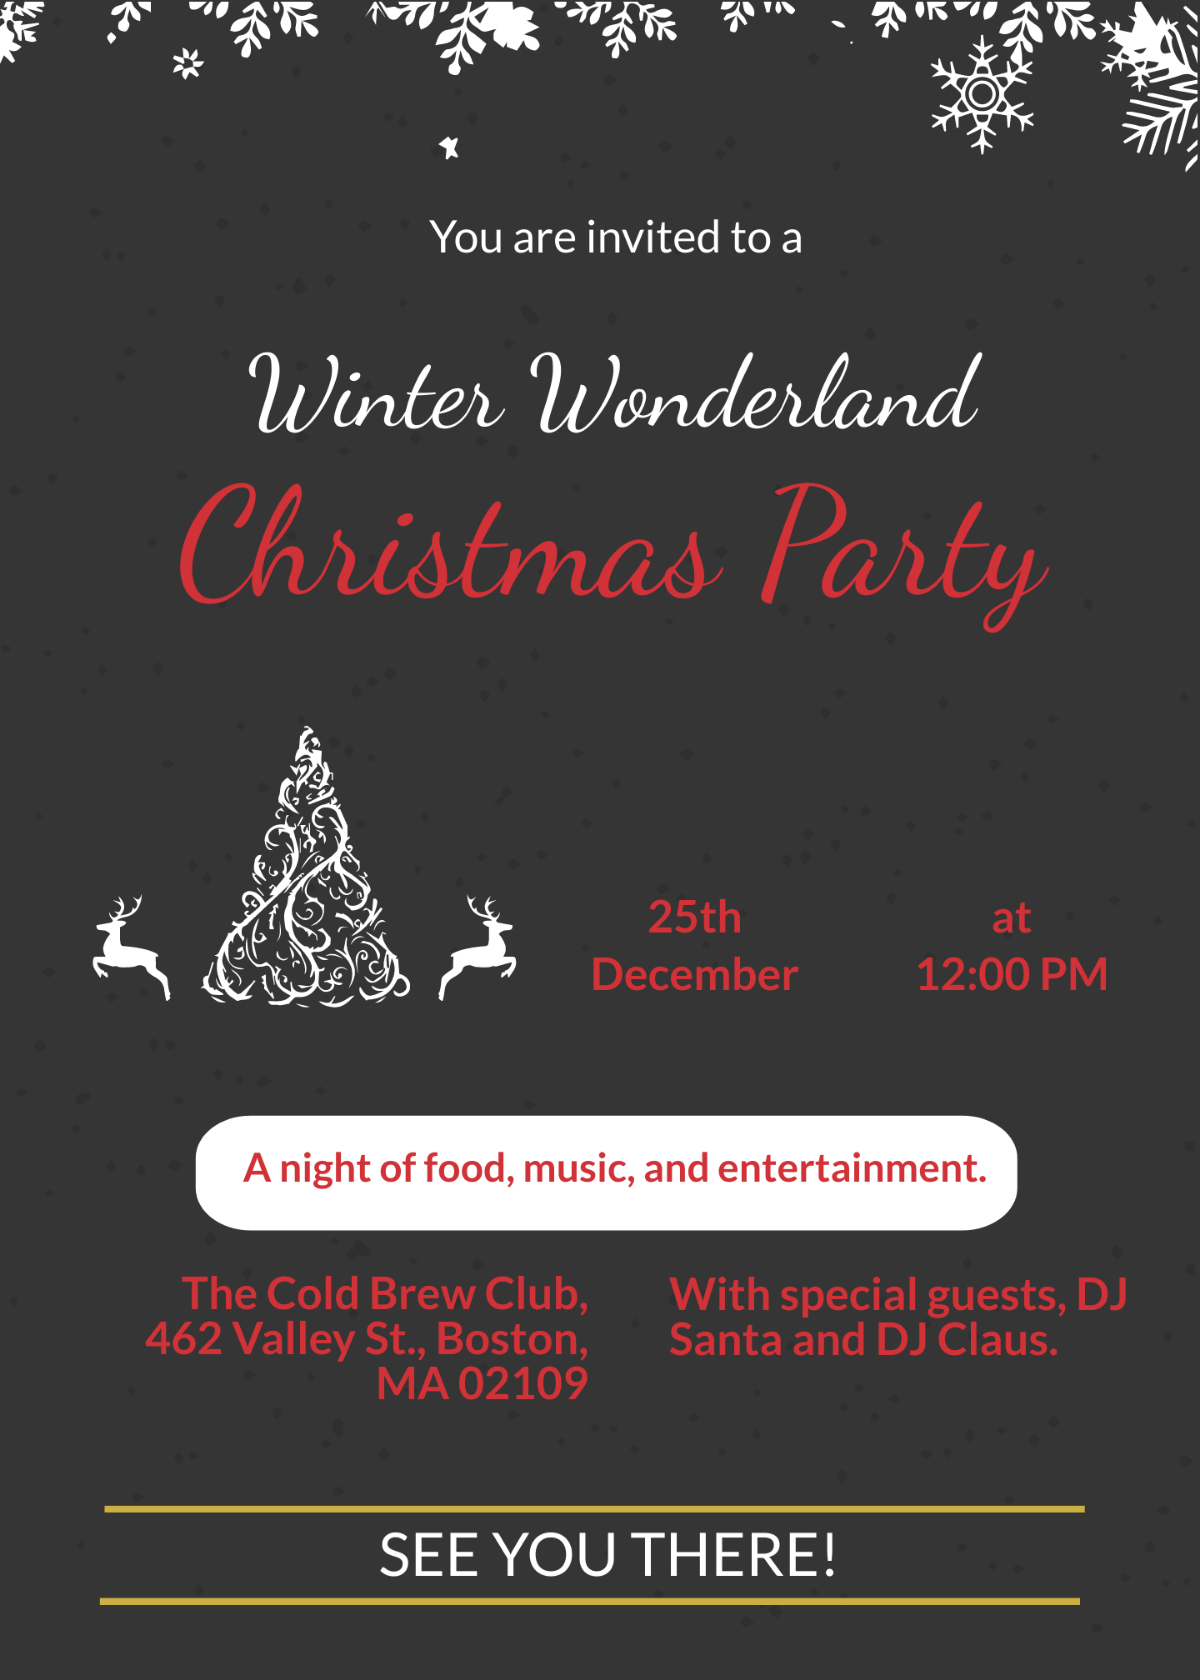 Free Creative Christmas Party Invitation Template